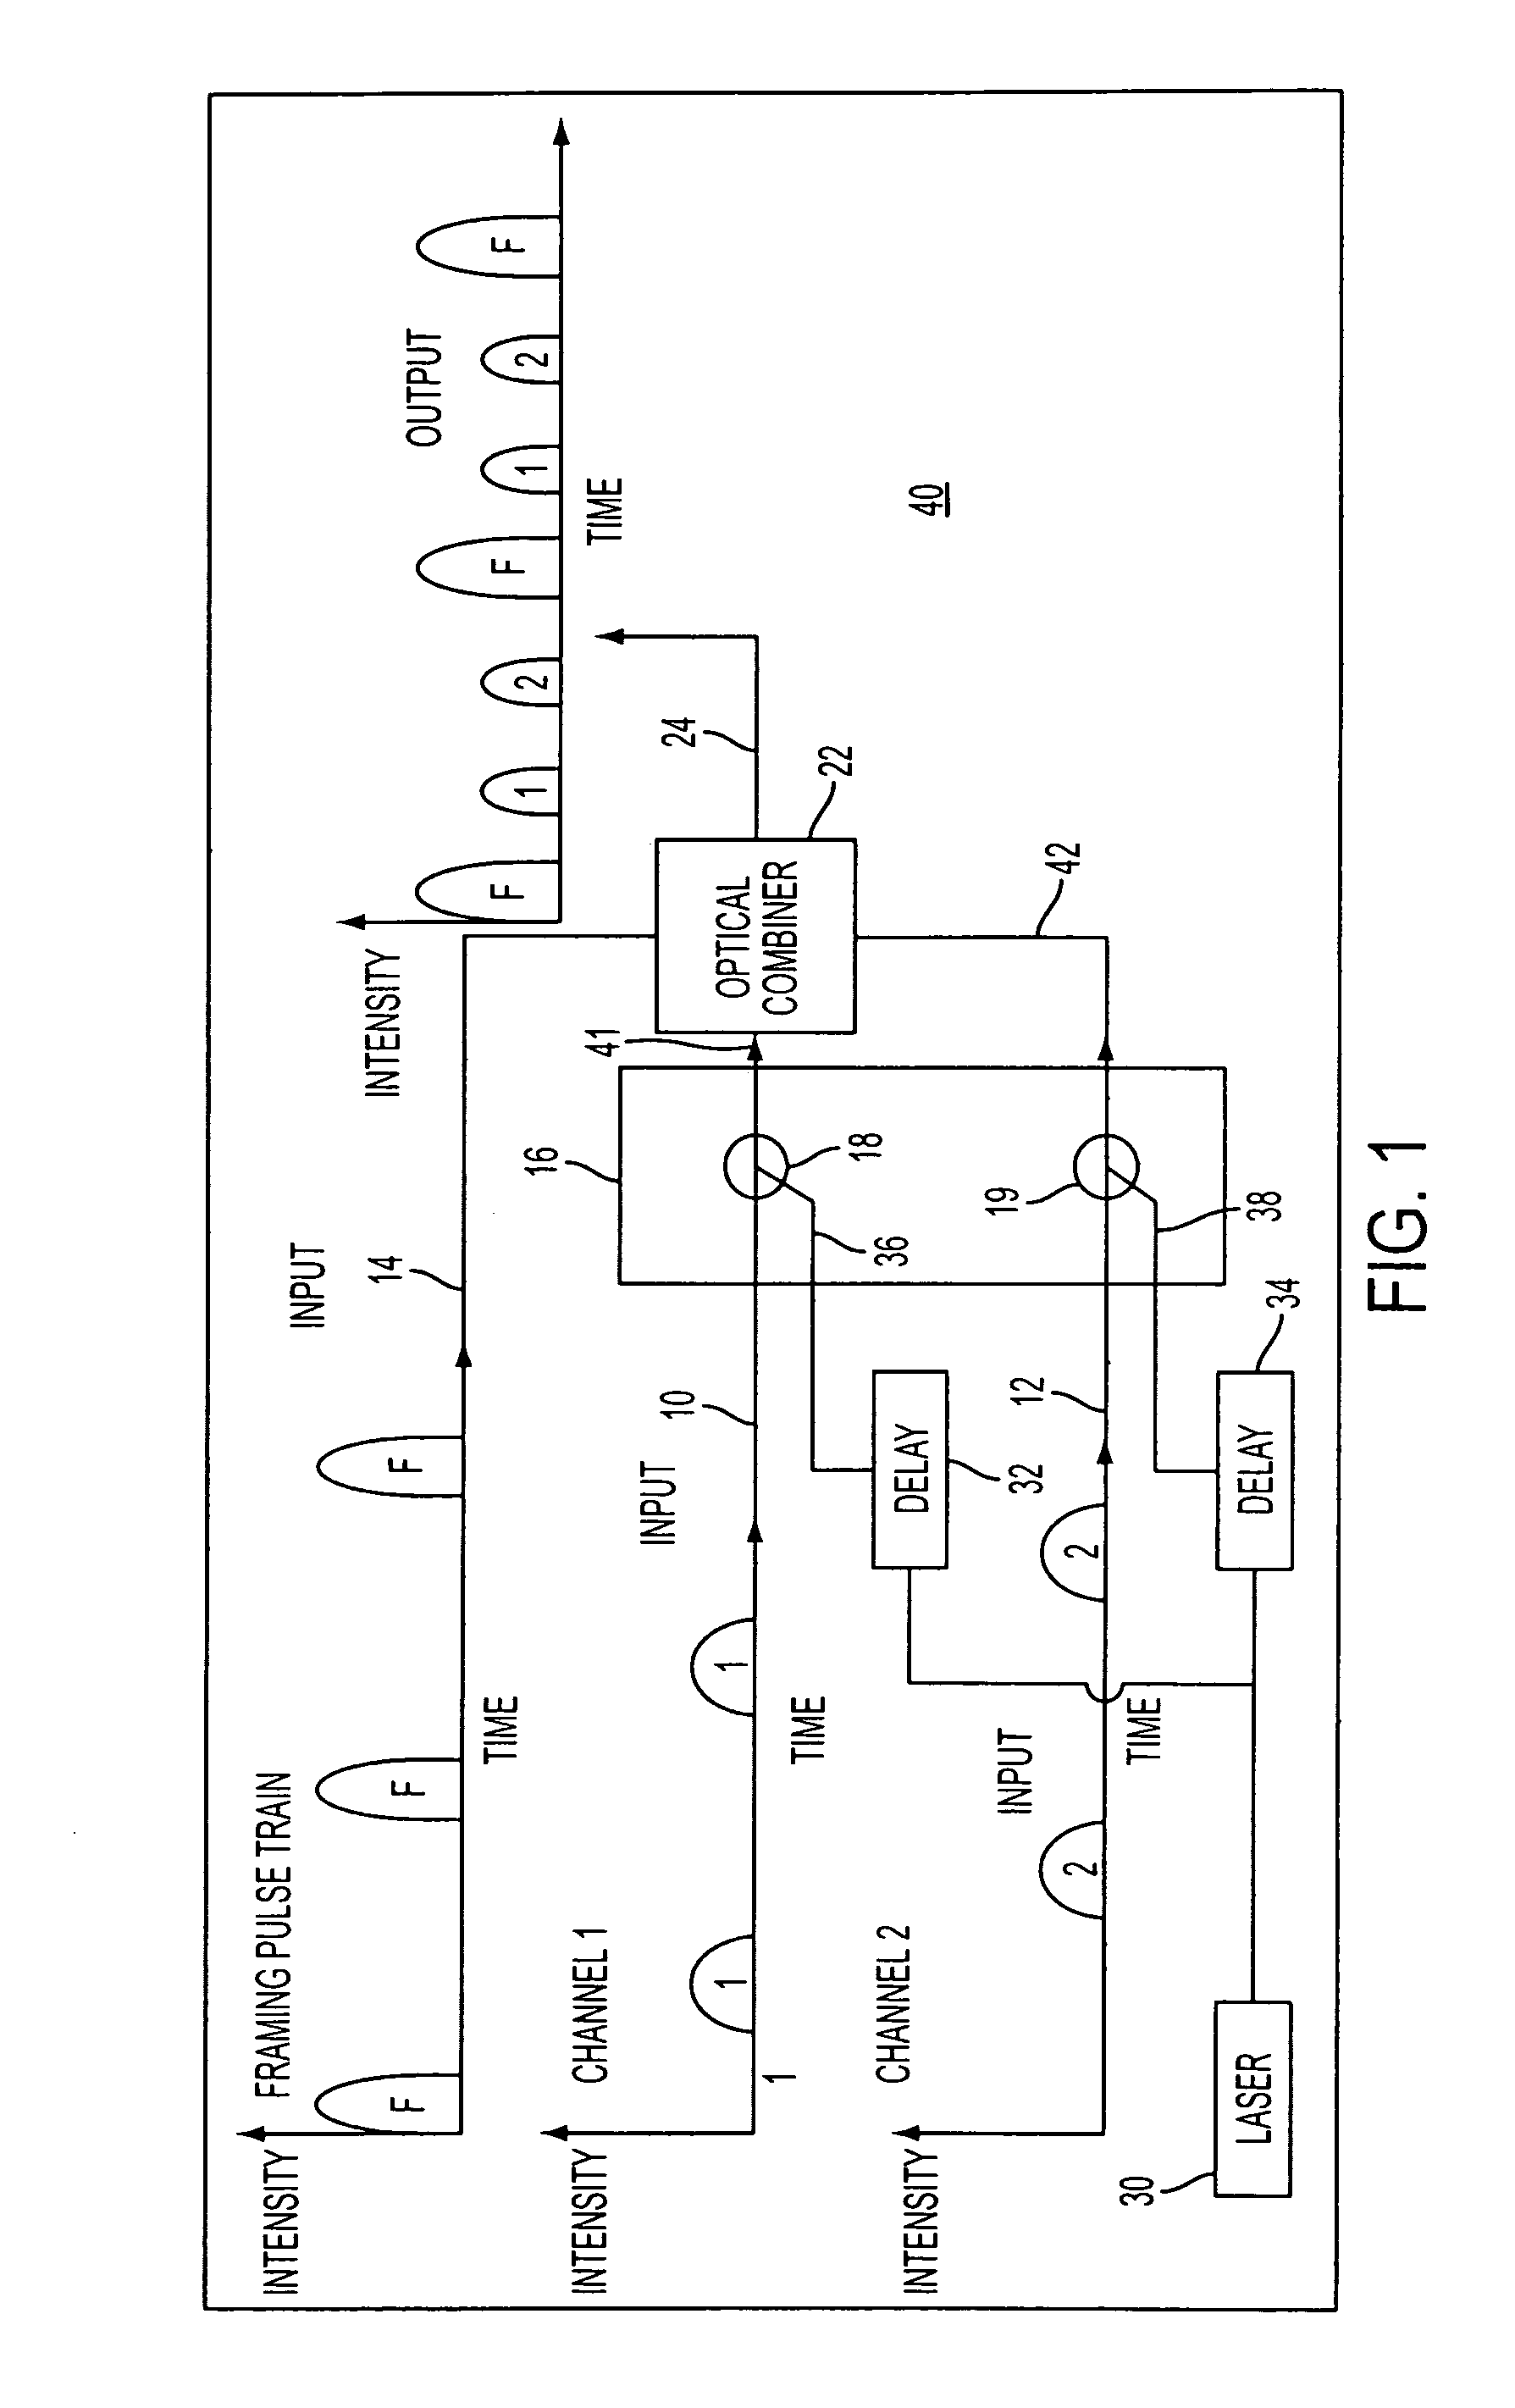 Optical time division multiplexing/demultiplexing system